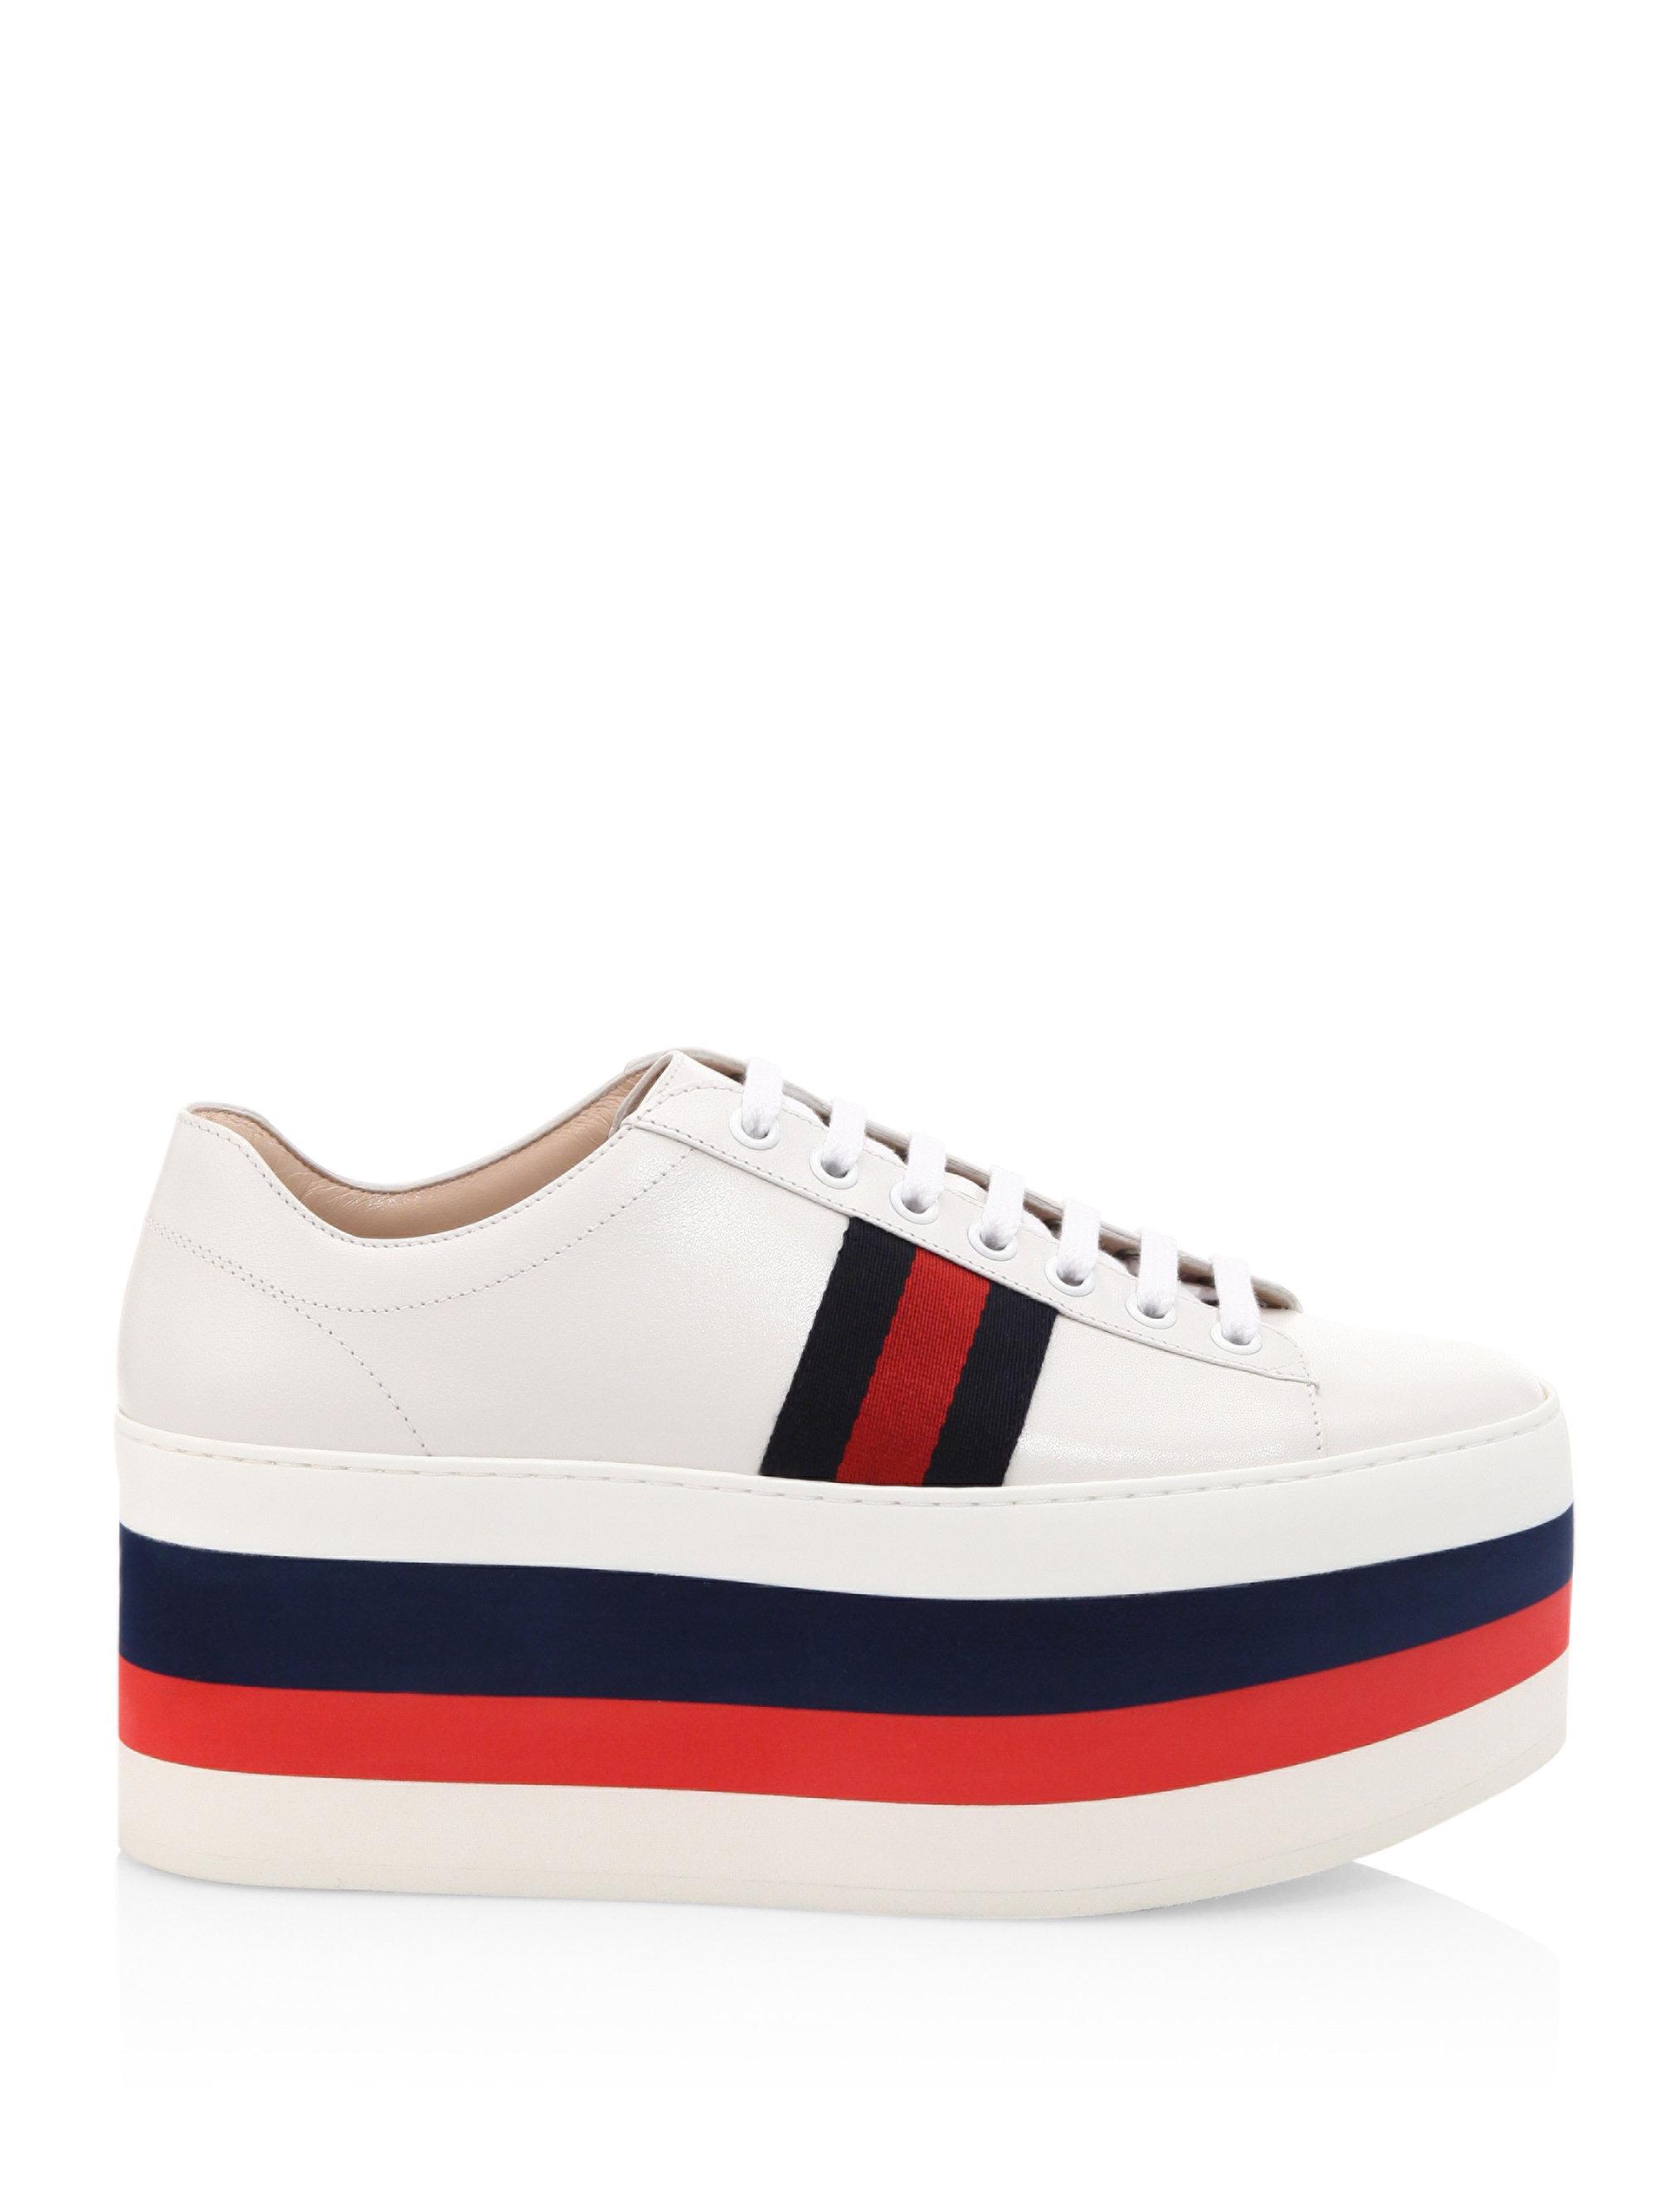 Lyst - Gucci Peggy Leather Rainbow Platform Sneakers in White